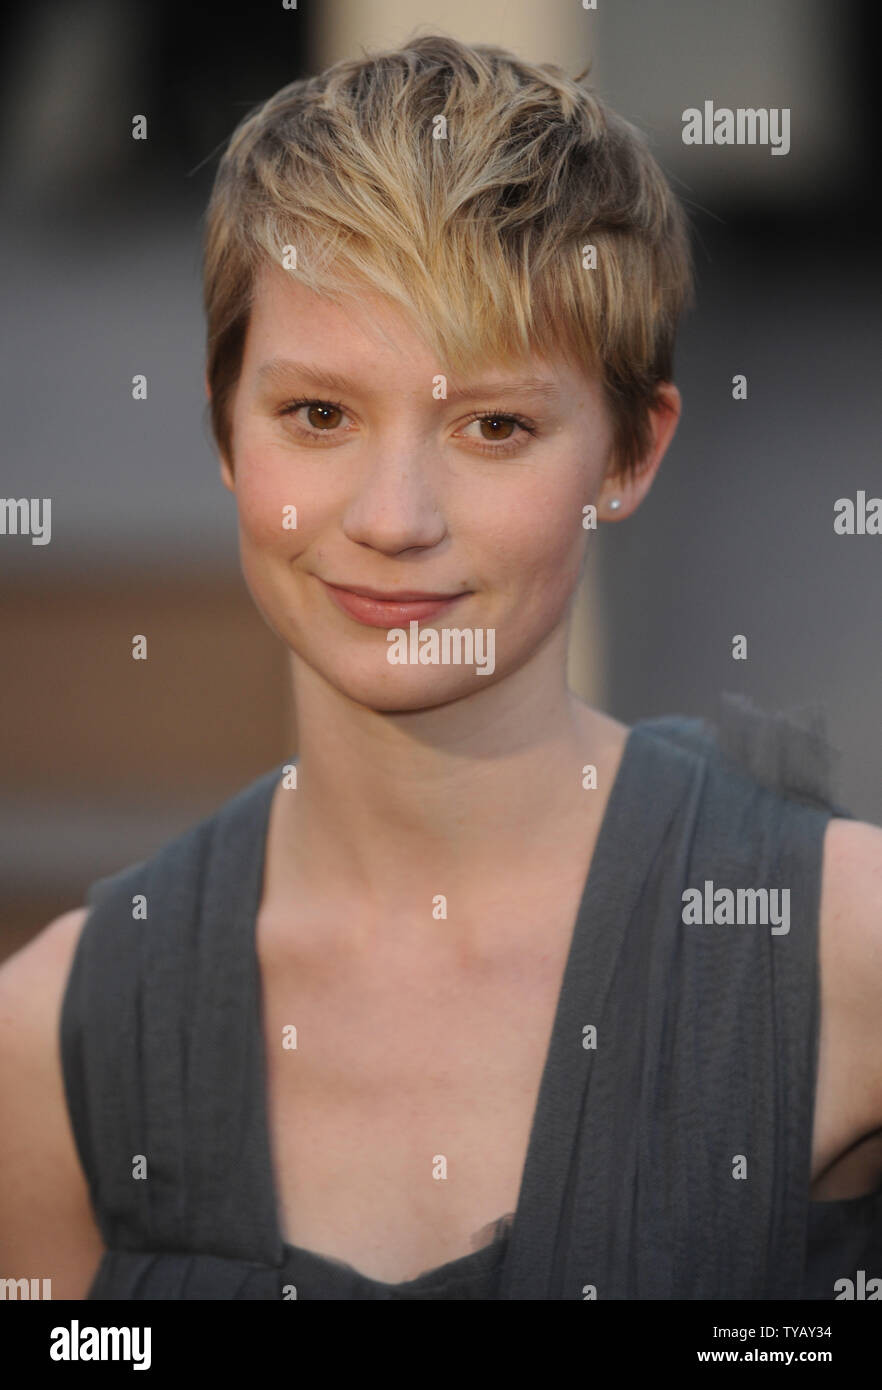 Australian actress Mia Wasikowska attends 'Burberry Prorsum' catwalk show at  Chelsea College Of Art And Design during Fashion Week in London on February 23, 2010.     UPI/Rune Hellestad Stock Photo